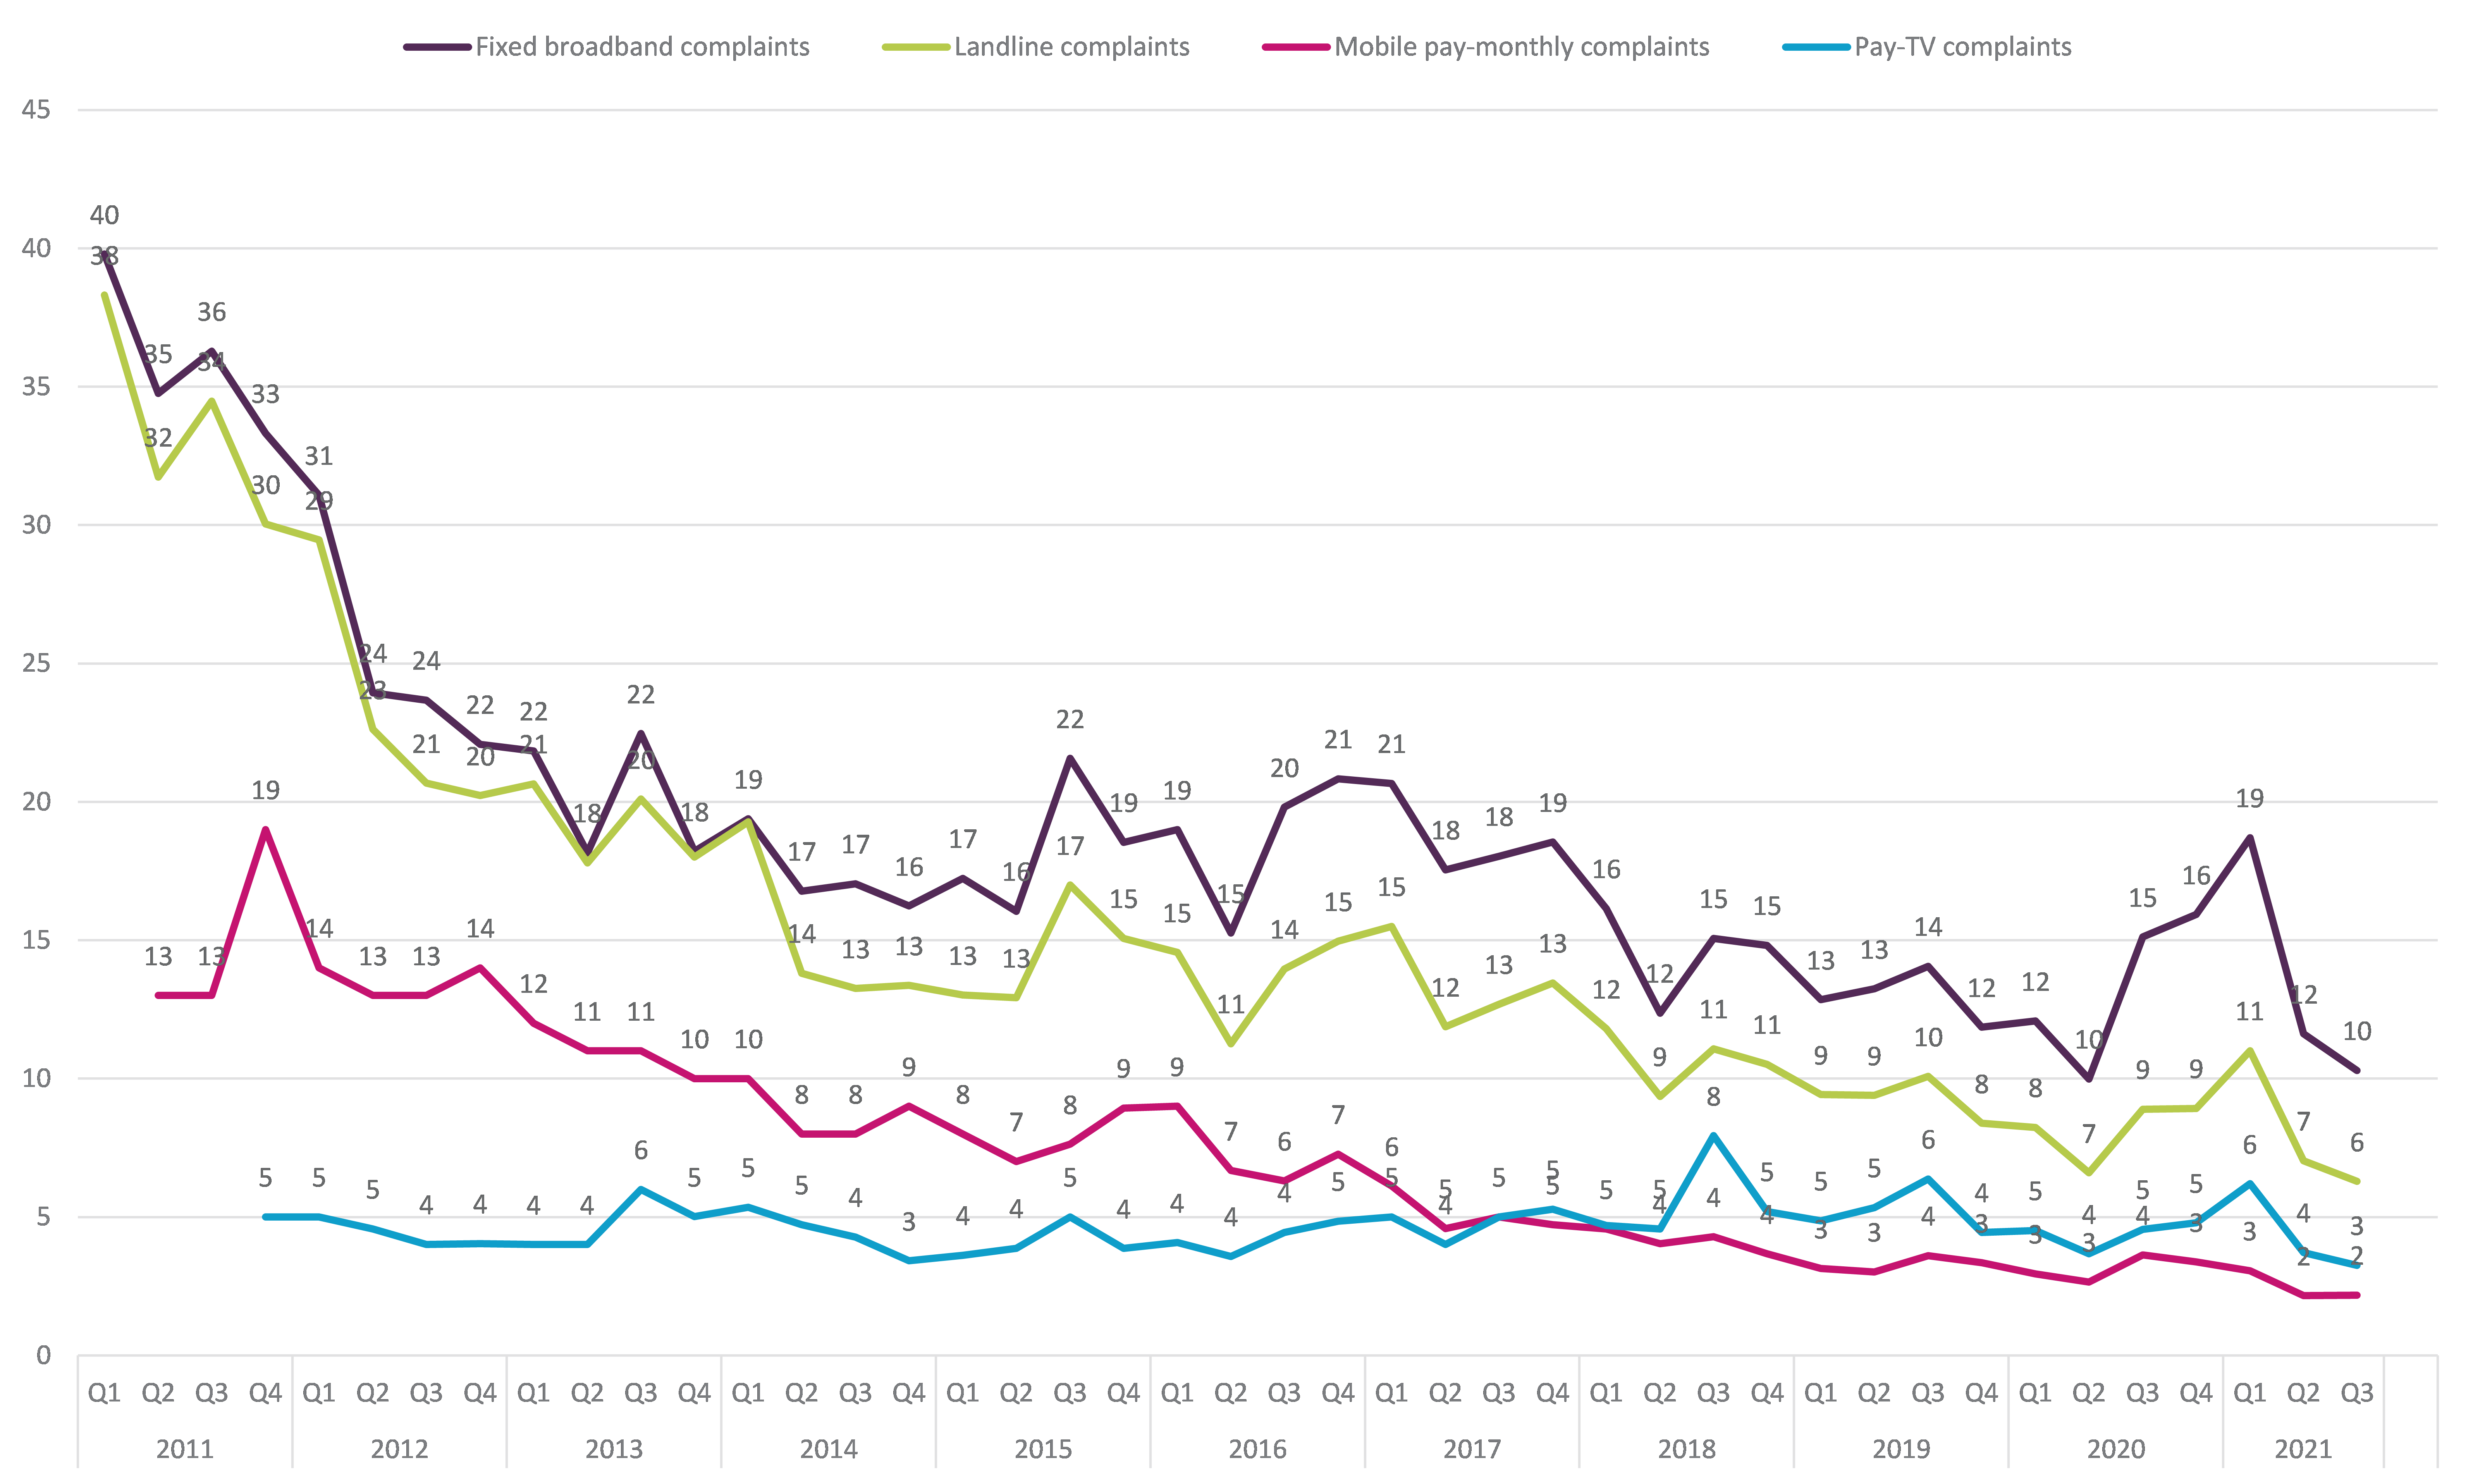 Graph showing trend data on residential consumer complaints received by Ofcom across landline, fixed broadband, pay-monthly mobile and pay TV services, by communications provider. It shows the relative volume of complaints per sector per 100,000 subscribers for the Q1 2011 – Q3 2021 period. The relative volume of complaints per 100,000 subscribers decreased for fixed broadband from 12 to 10, landline from 7 to 6, and pay TV from 4 to 3. Mobile pay monthly remained the same at 2. 